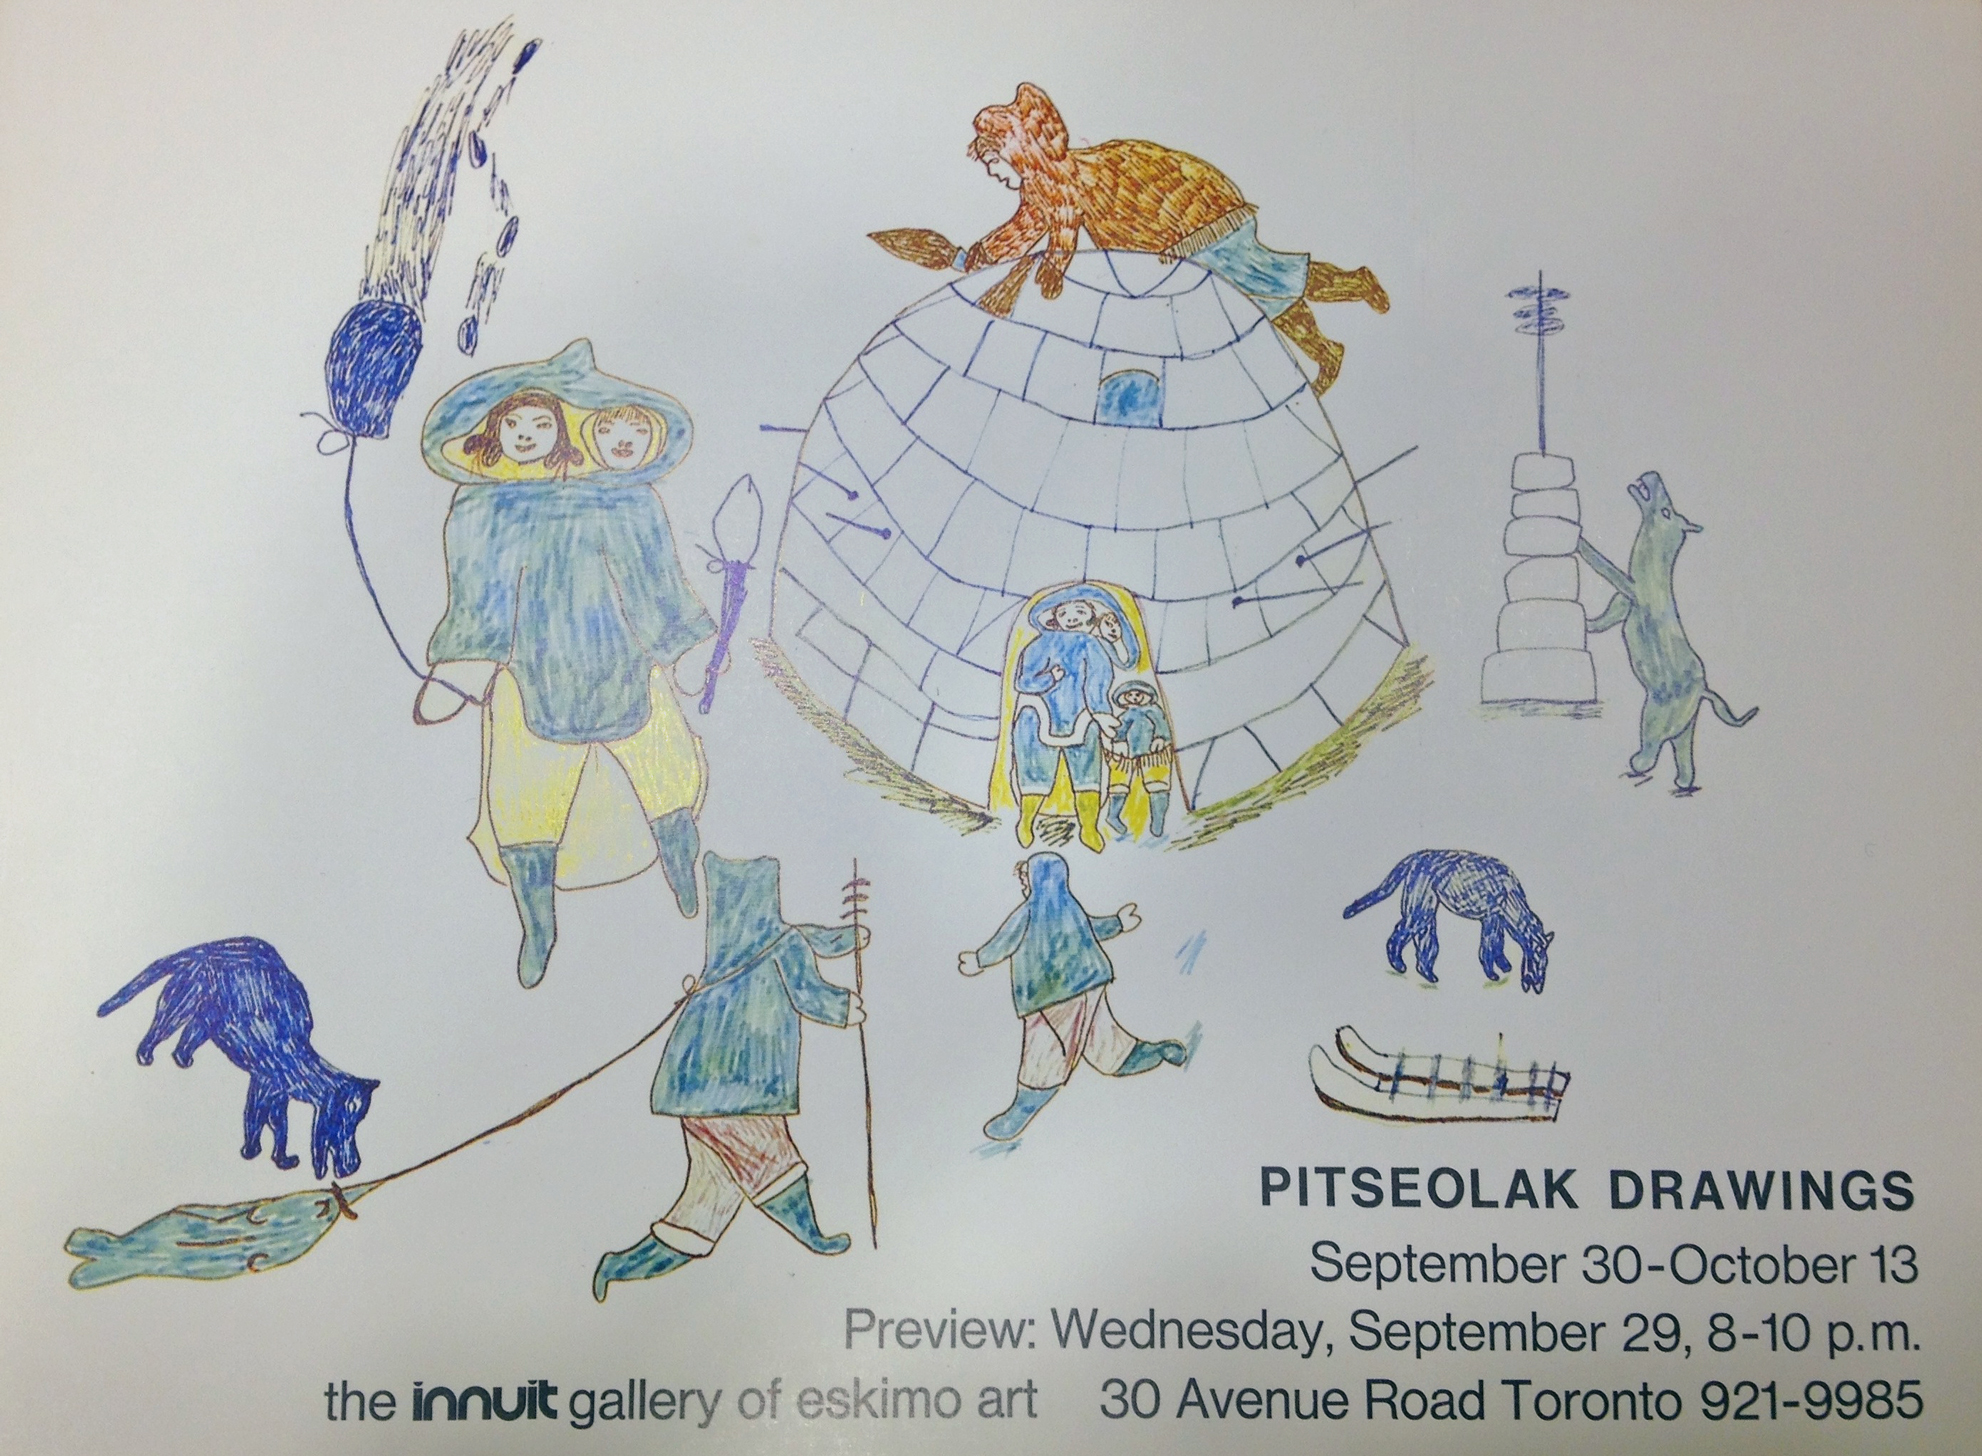 Art Canada Institute, Postcard for the 1971 exhibition of Pitseolak’s drawings at the Innuit Gallery in Toronto